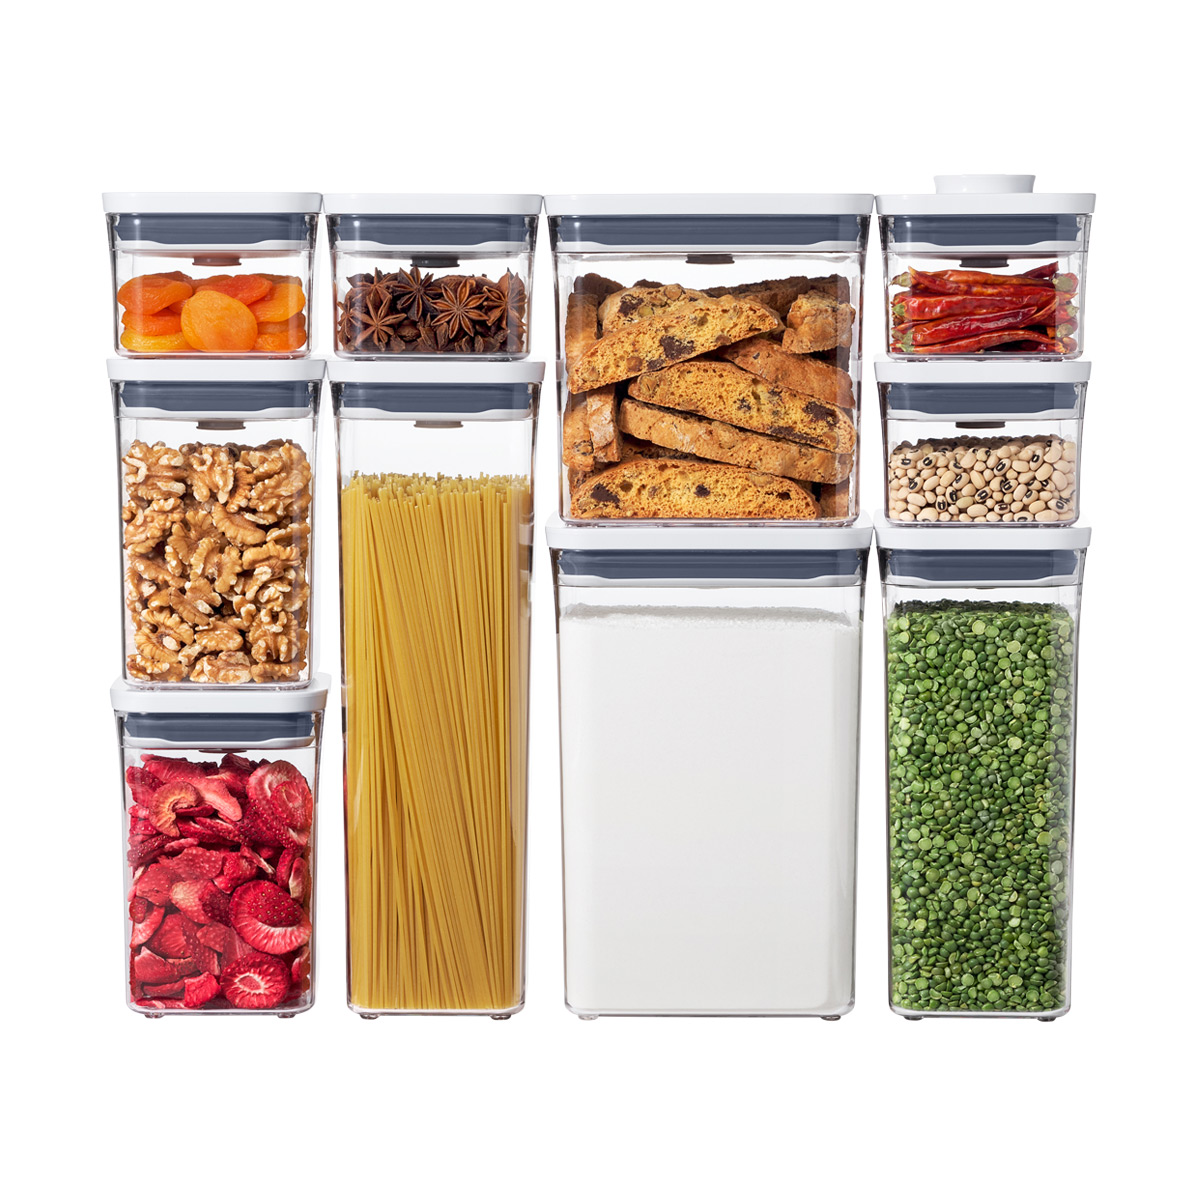 https://www.containerstore.com/catalogimages/369081/10075139-OXO-10-Piece-POP-Container-.jpg